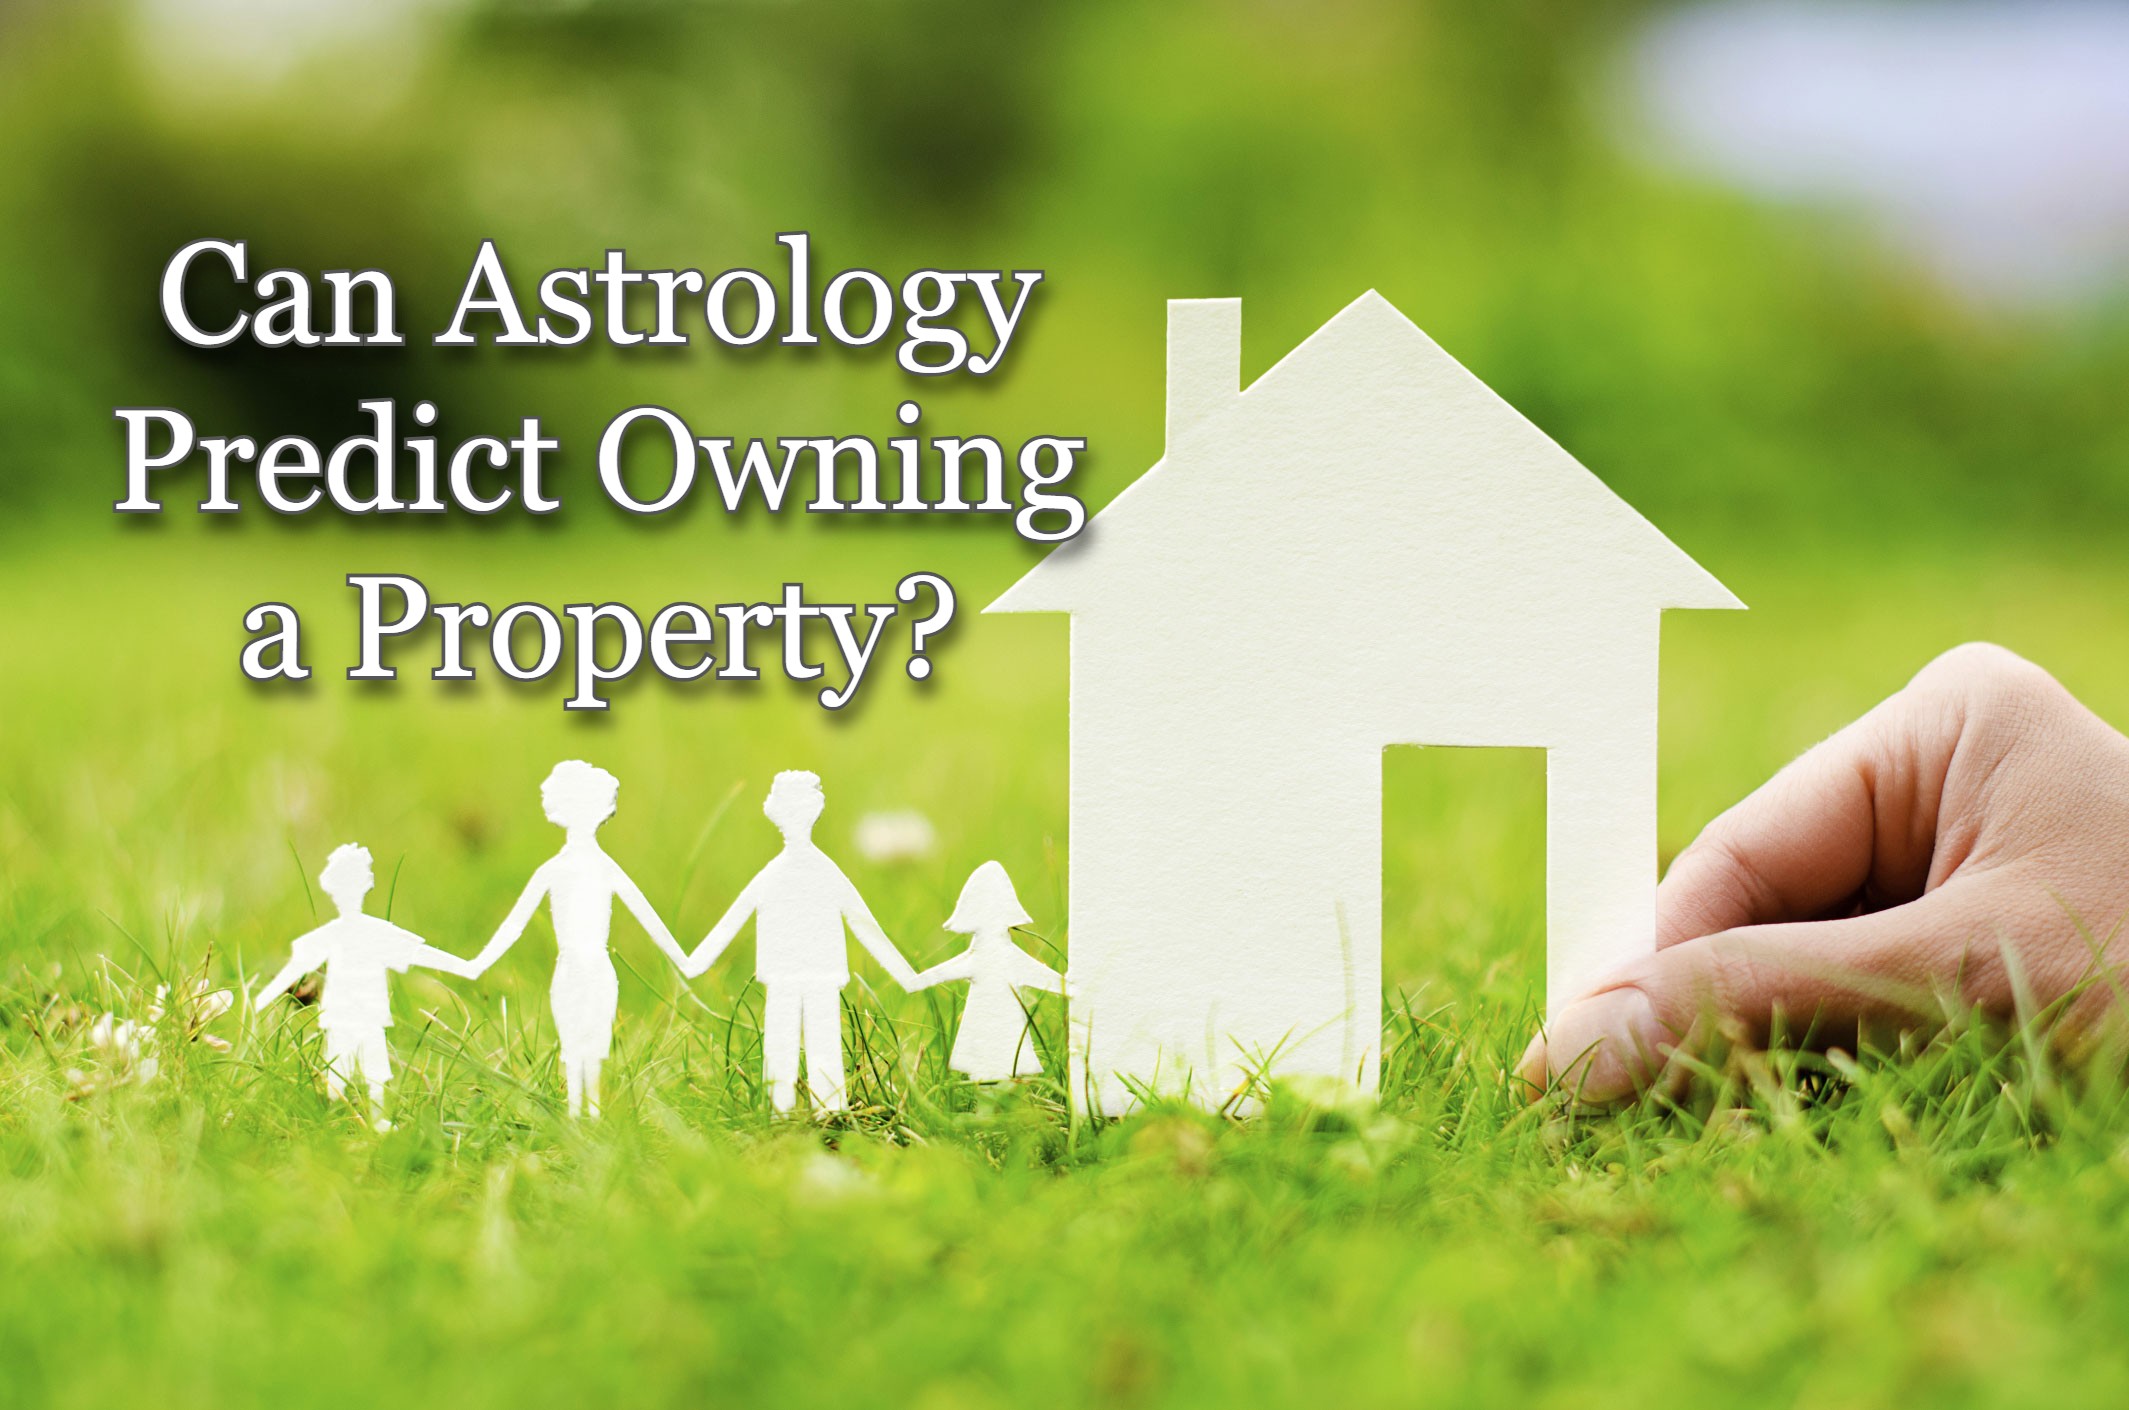 Can Astrology Predict Owning a Property